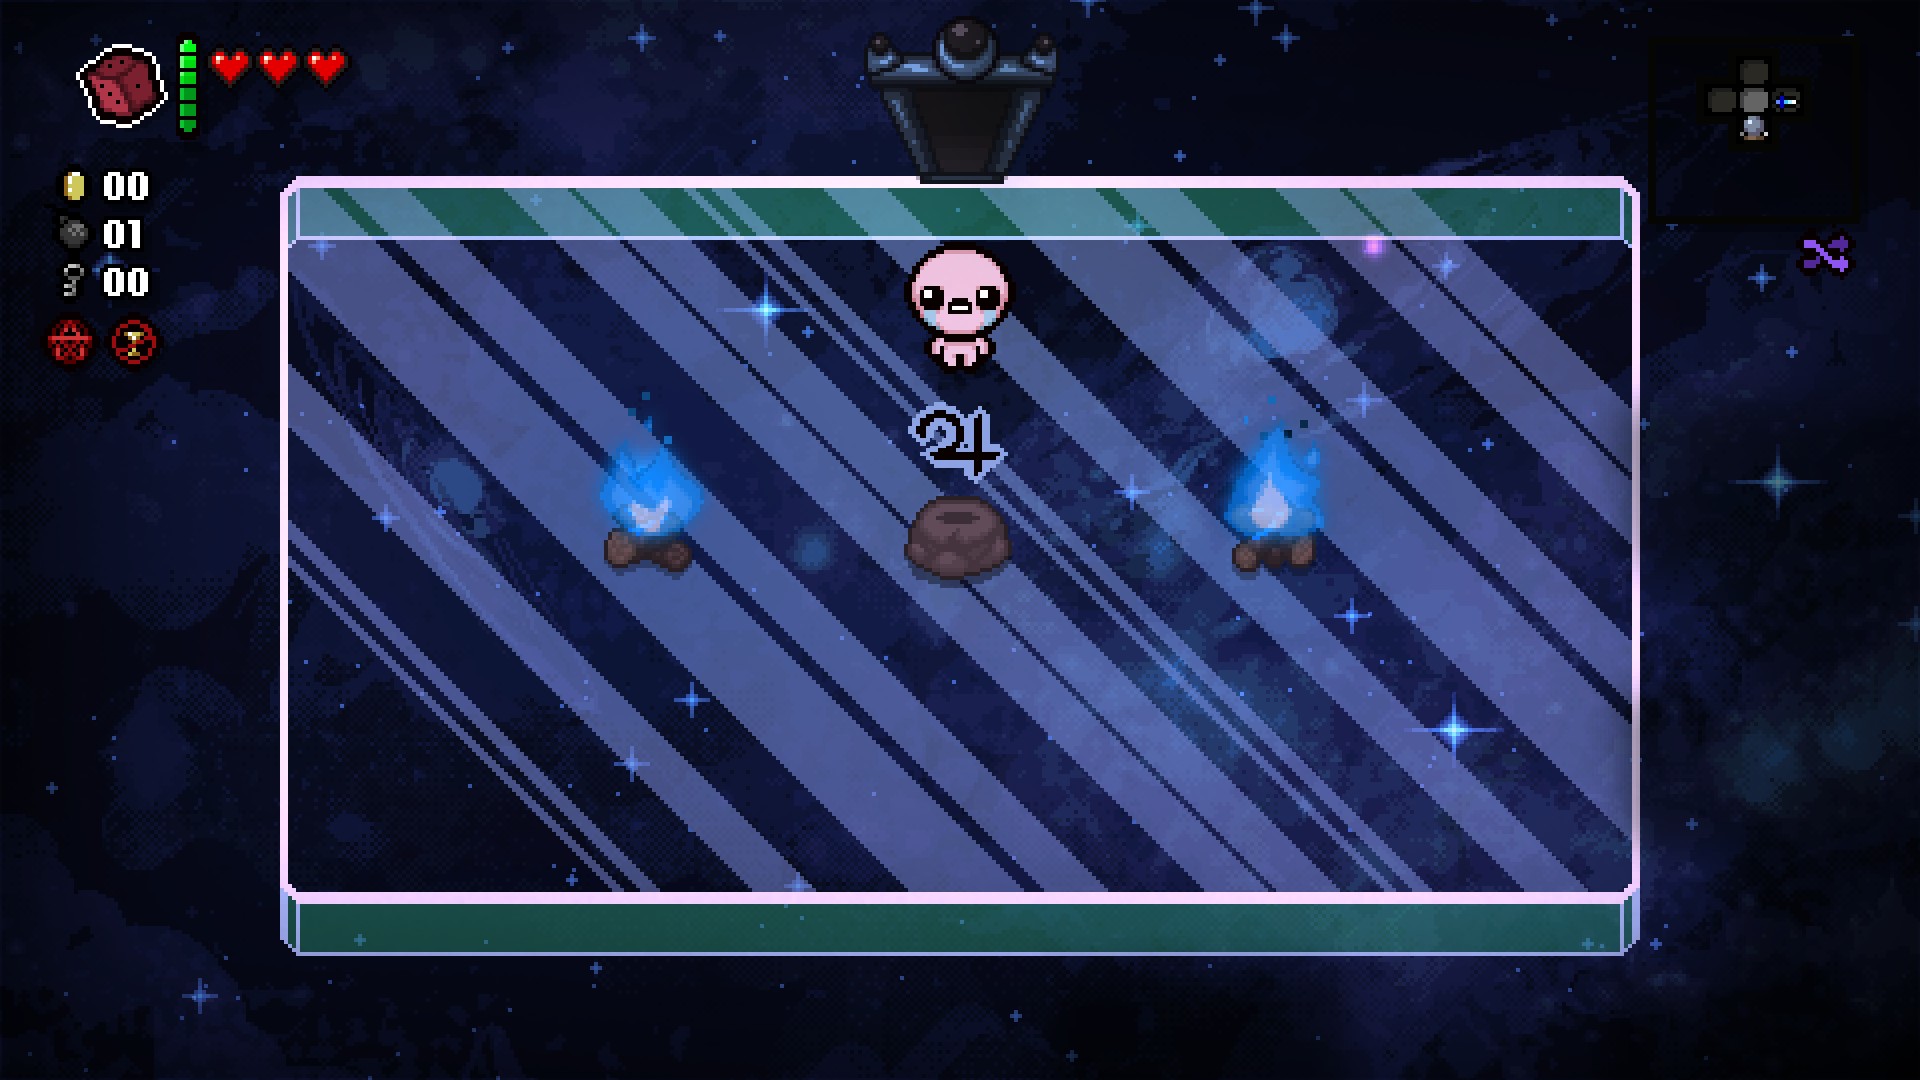 binding of isaac solar system